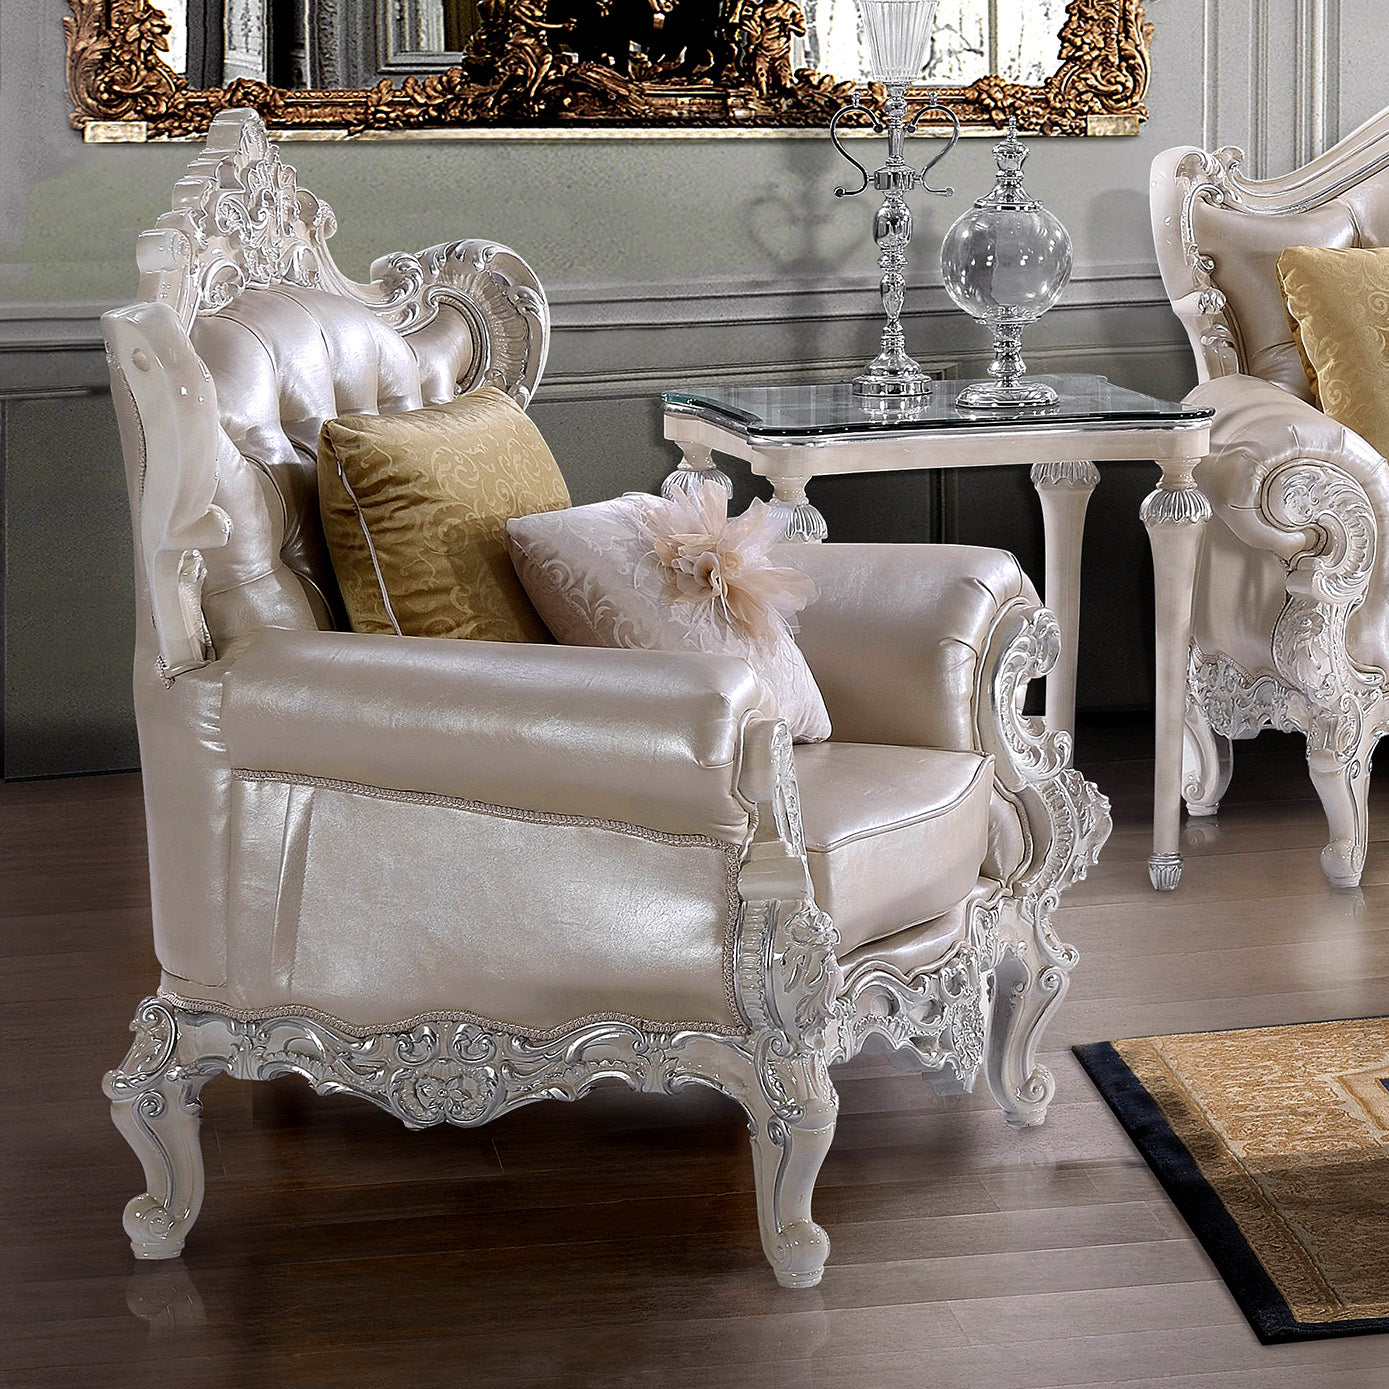 Leather Accent Chair in Antique White & Metallic Silver Finish European